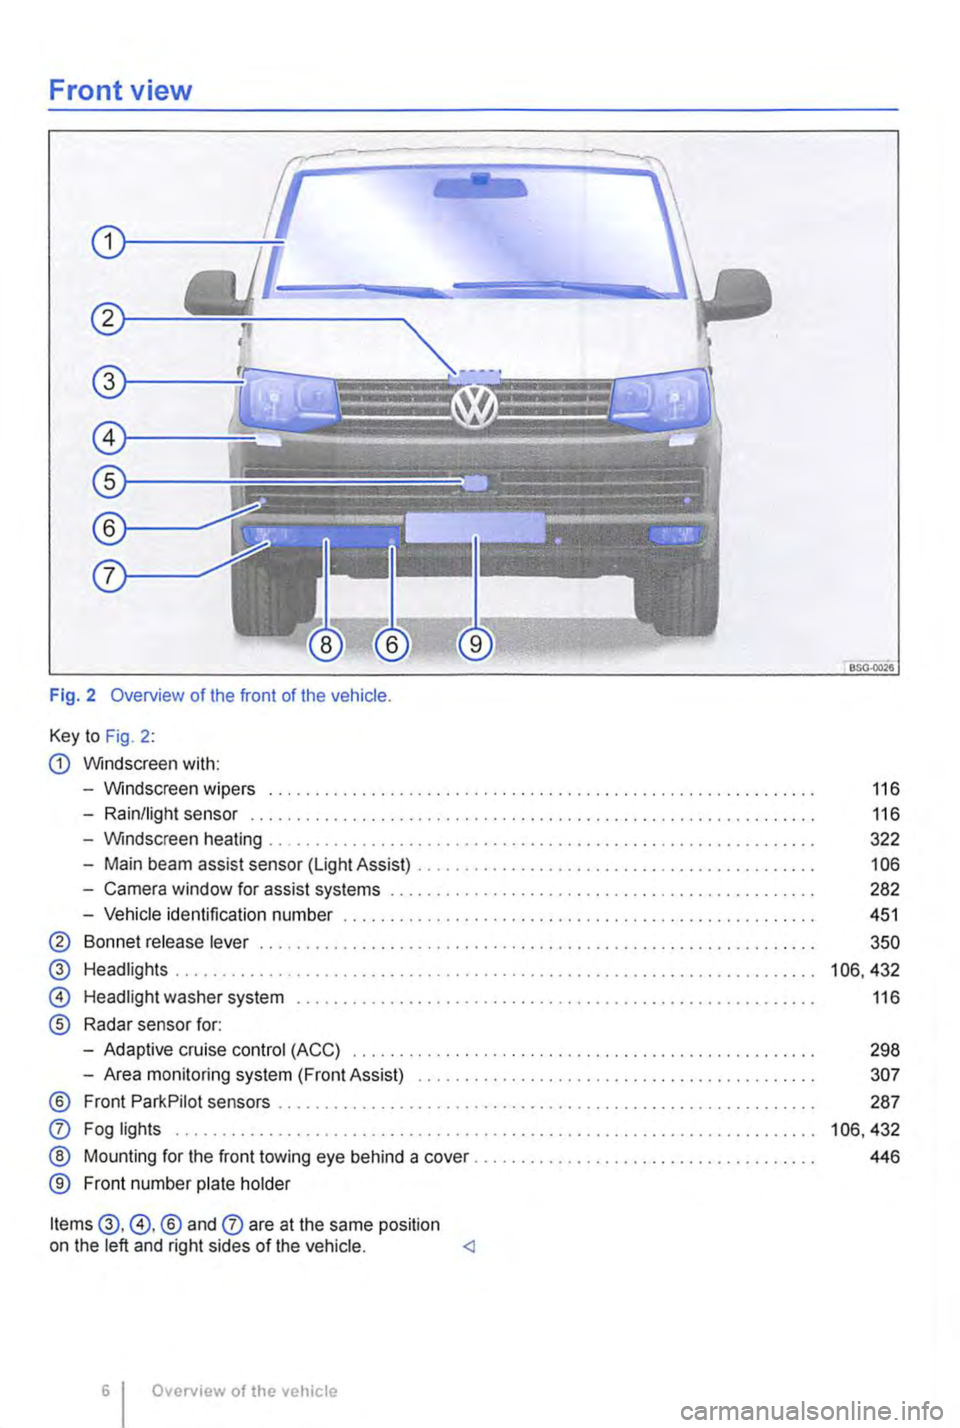 VOLKSWAGEN TRANSPORTER 2011  Owners Manual Front view 
Fig. 2 Overview of the front of the vehicle. 
Key to Fig. 2: 
G) Windscreen with: 
-Windscreen wipers .............. . 
-Rain/light sensor .............. . 
-Windscreen heating 
-Main beam